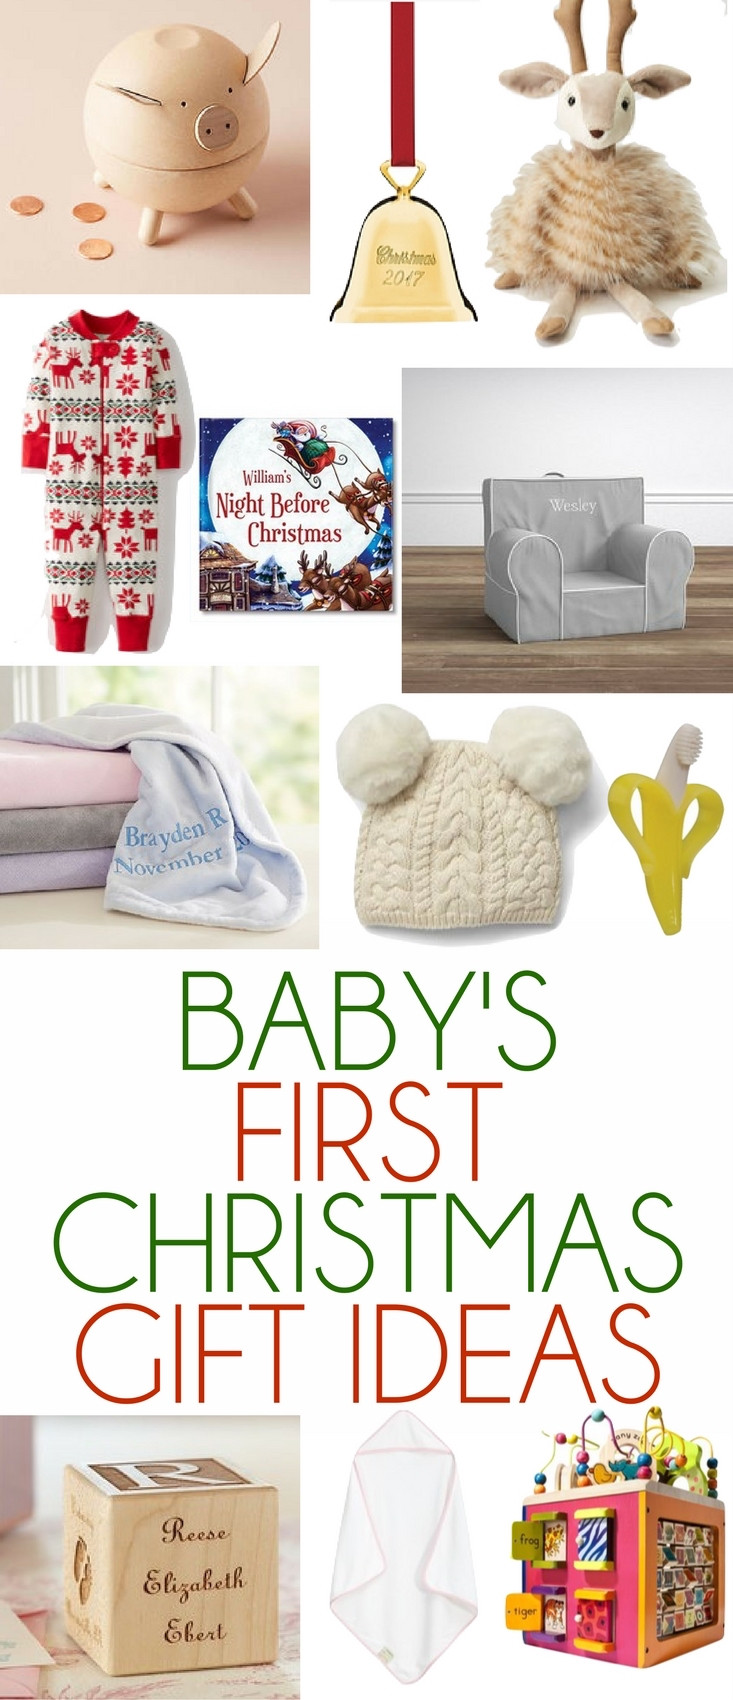 Babys First Christmas Gift Ideas
 Baby s First Christmas Gift Ideas Lovely Lucky Life